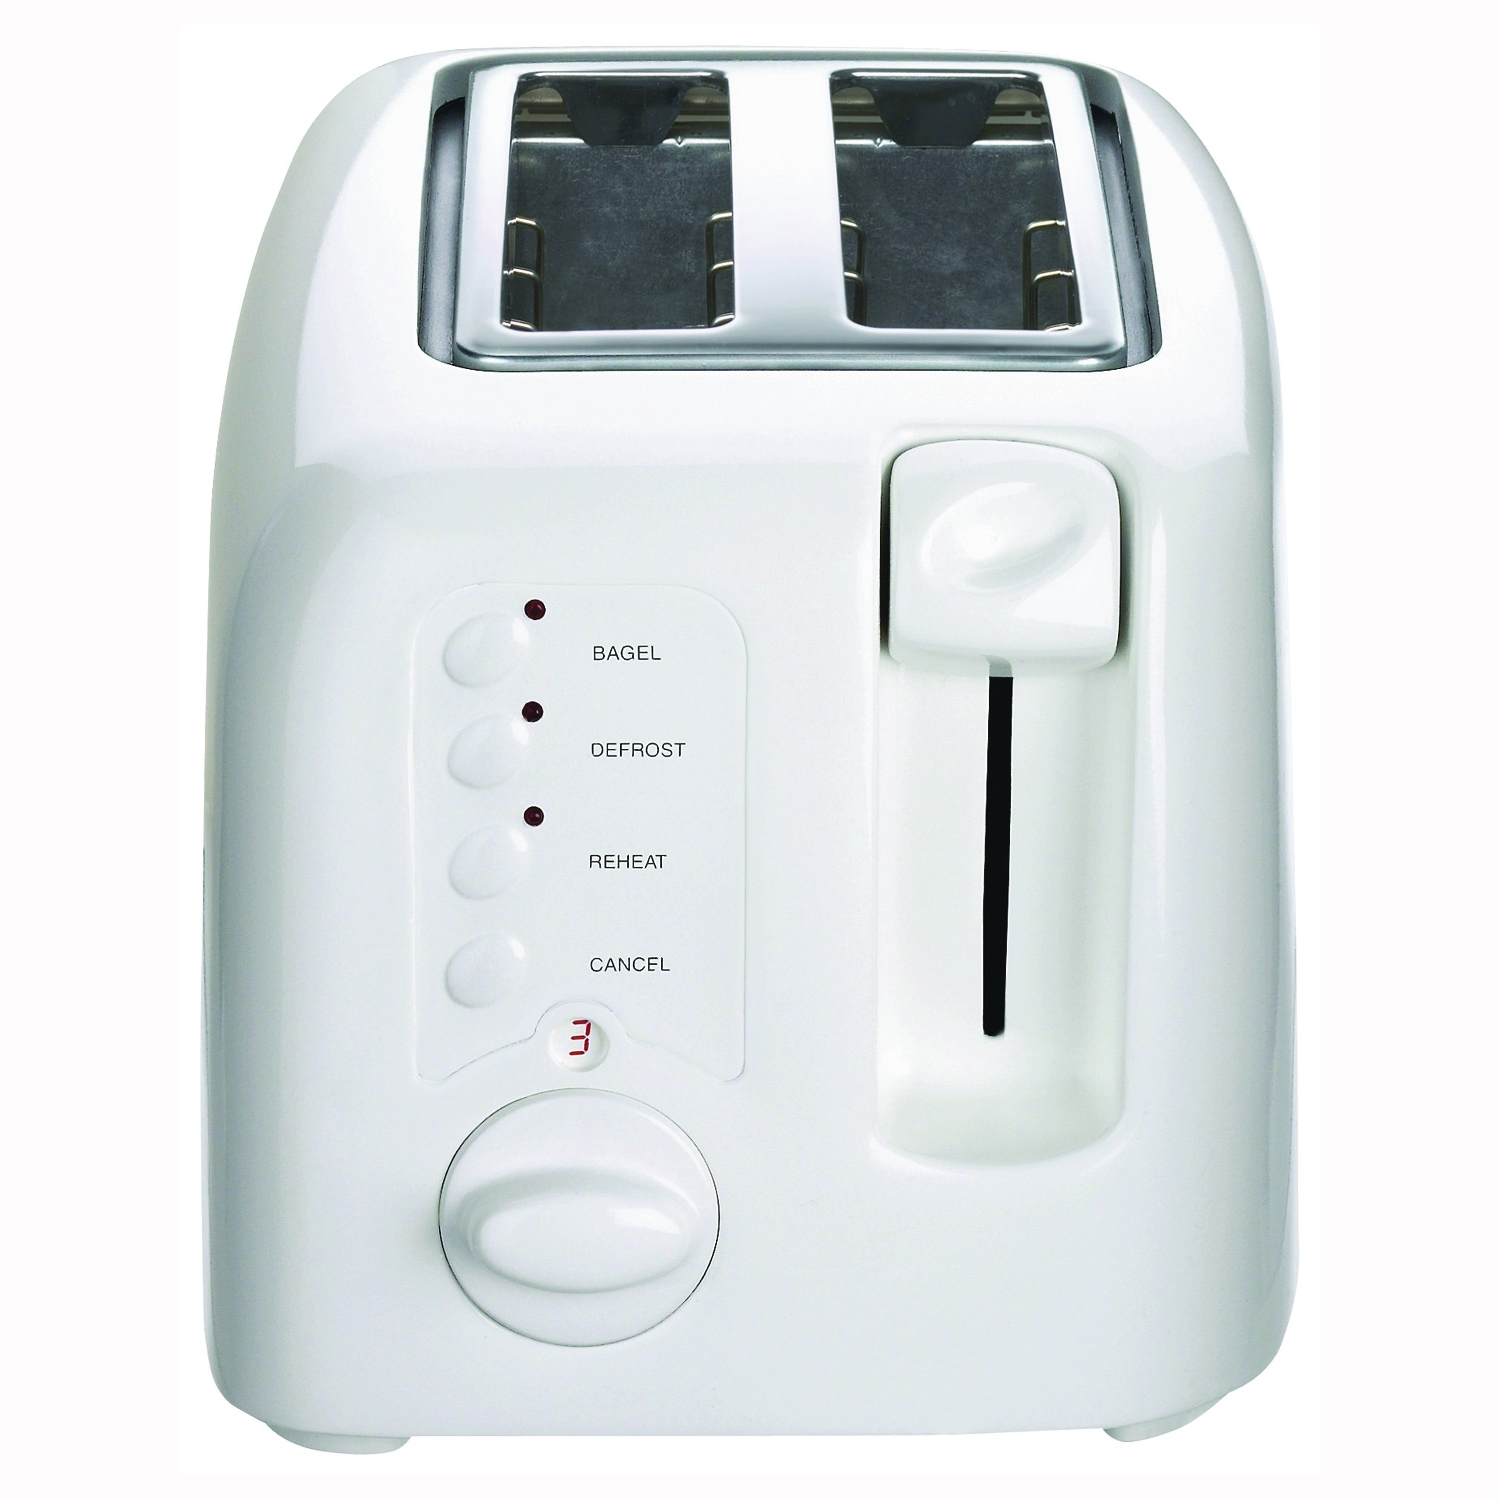 Cuisinart CPT-122 Compact Toaster, 2-Slice, 7, Button, Dial, Lever Control, Plastic, White - 3